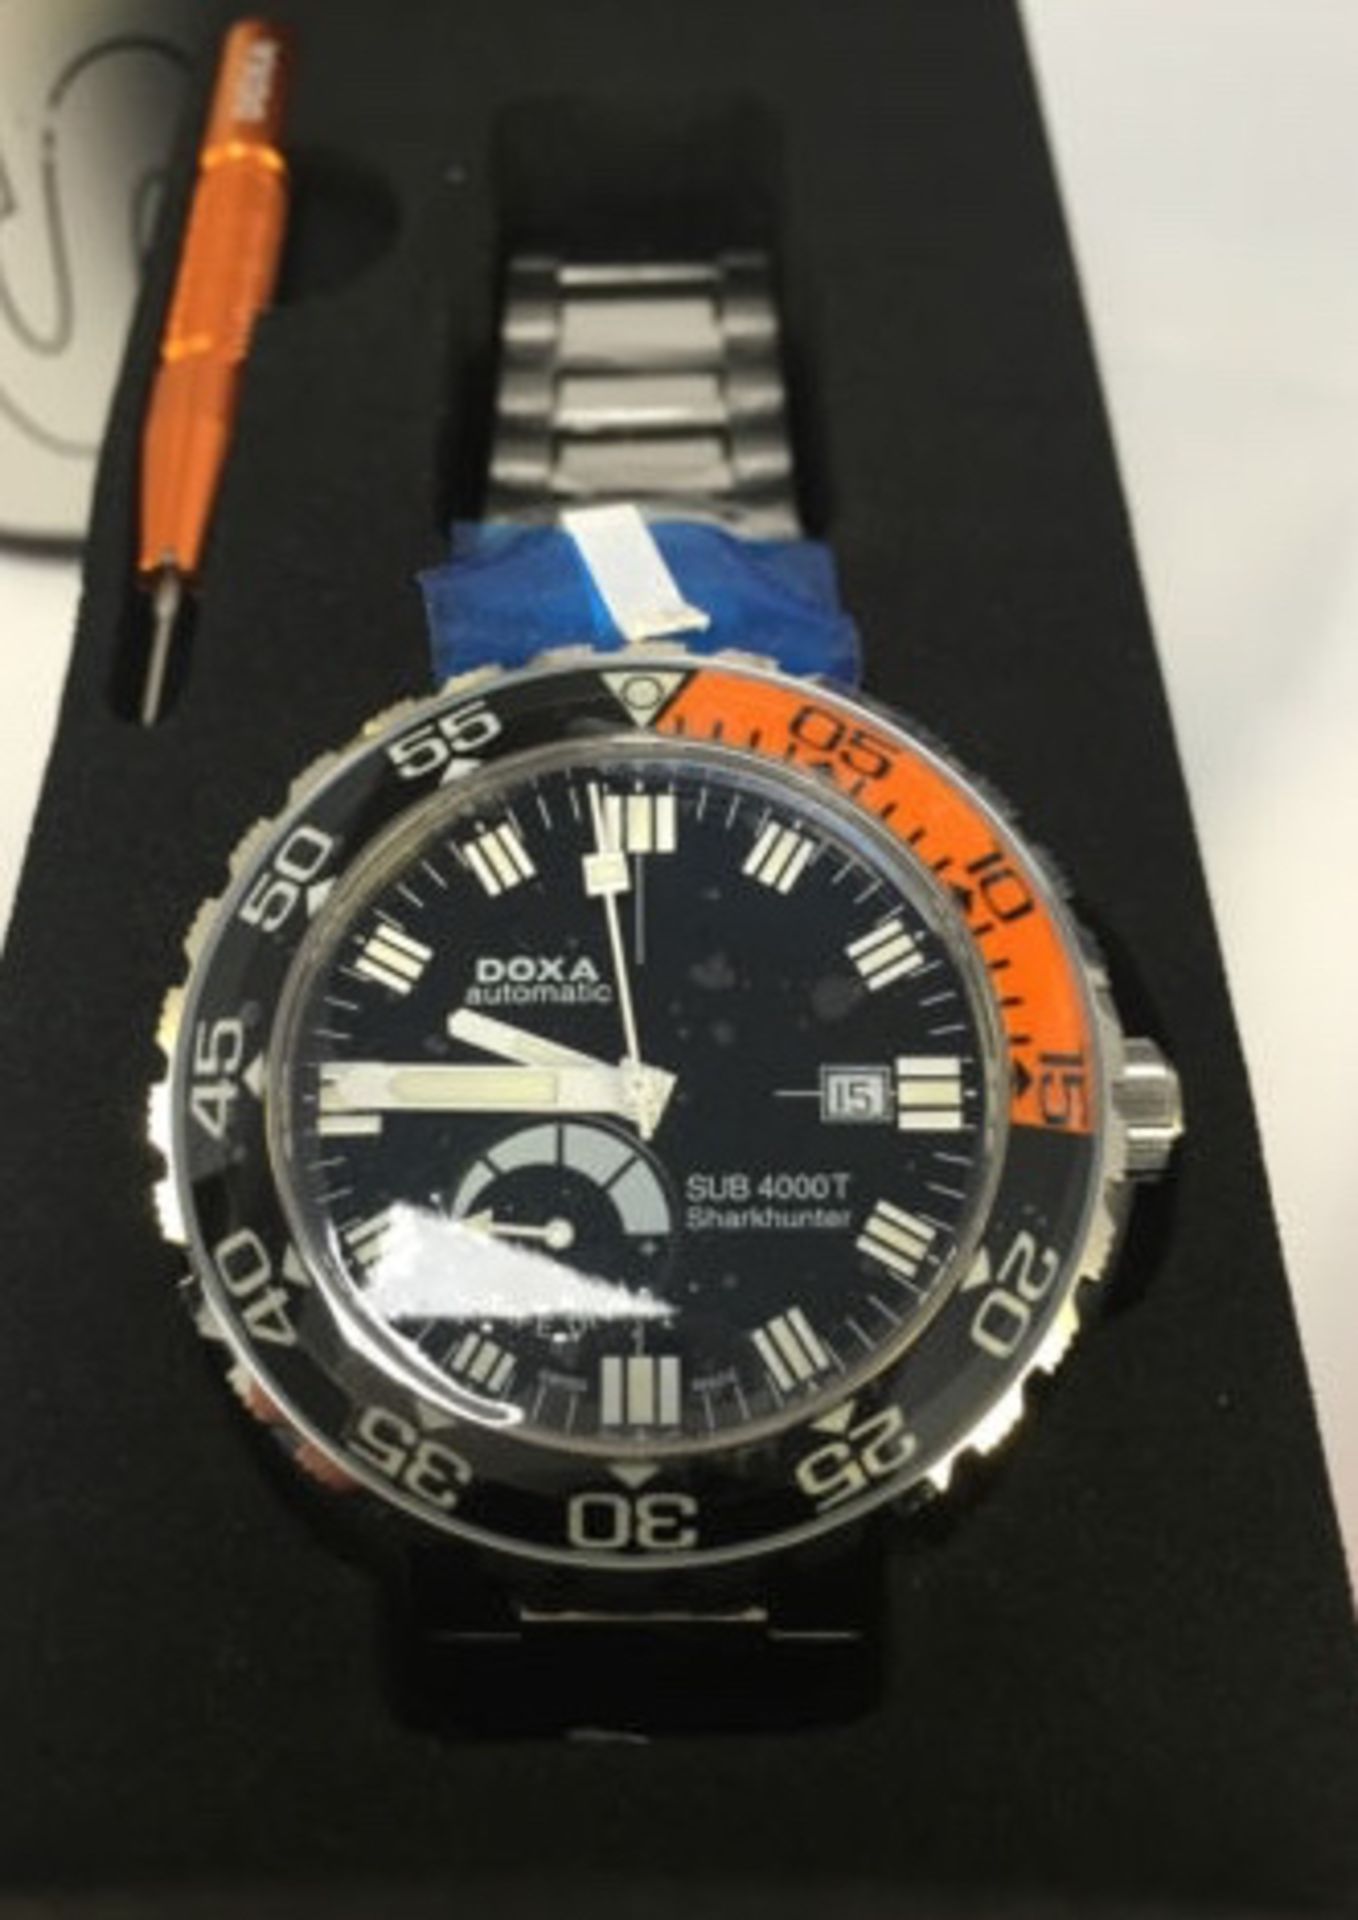 Brand New in Box - Doxa Sub 4000T Sharkhunter Sapphire Bezel Men's Automatic Watch with Black Dial